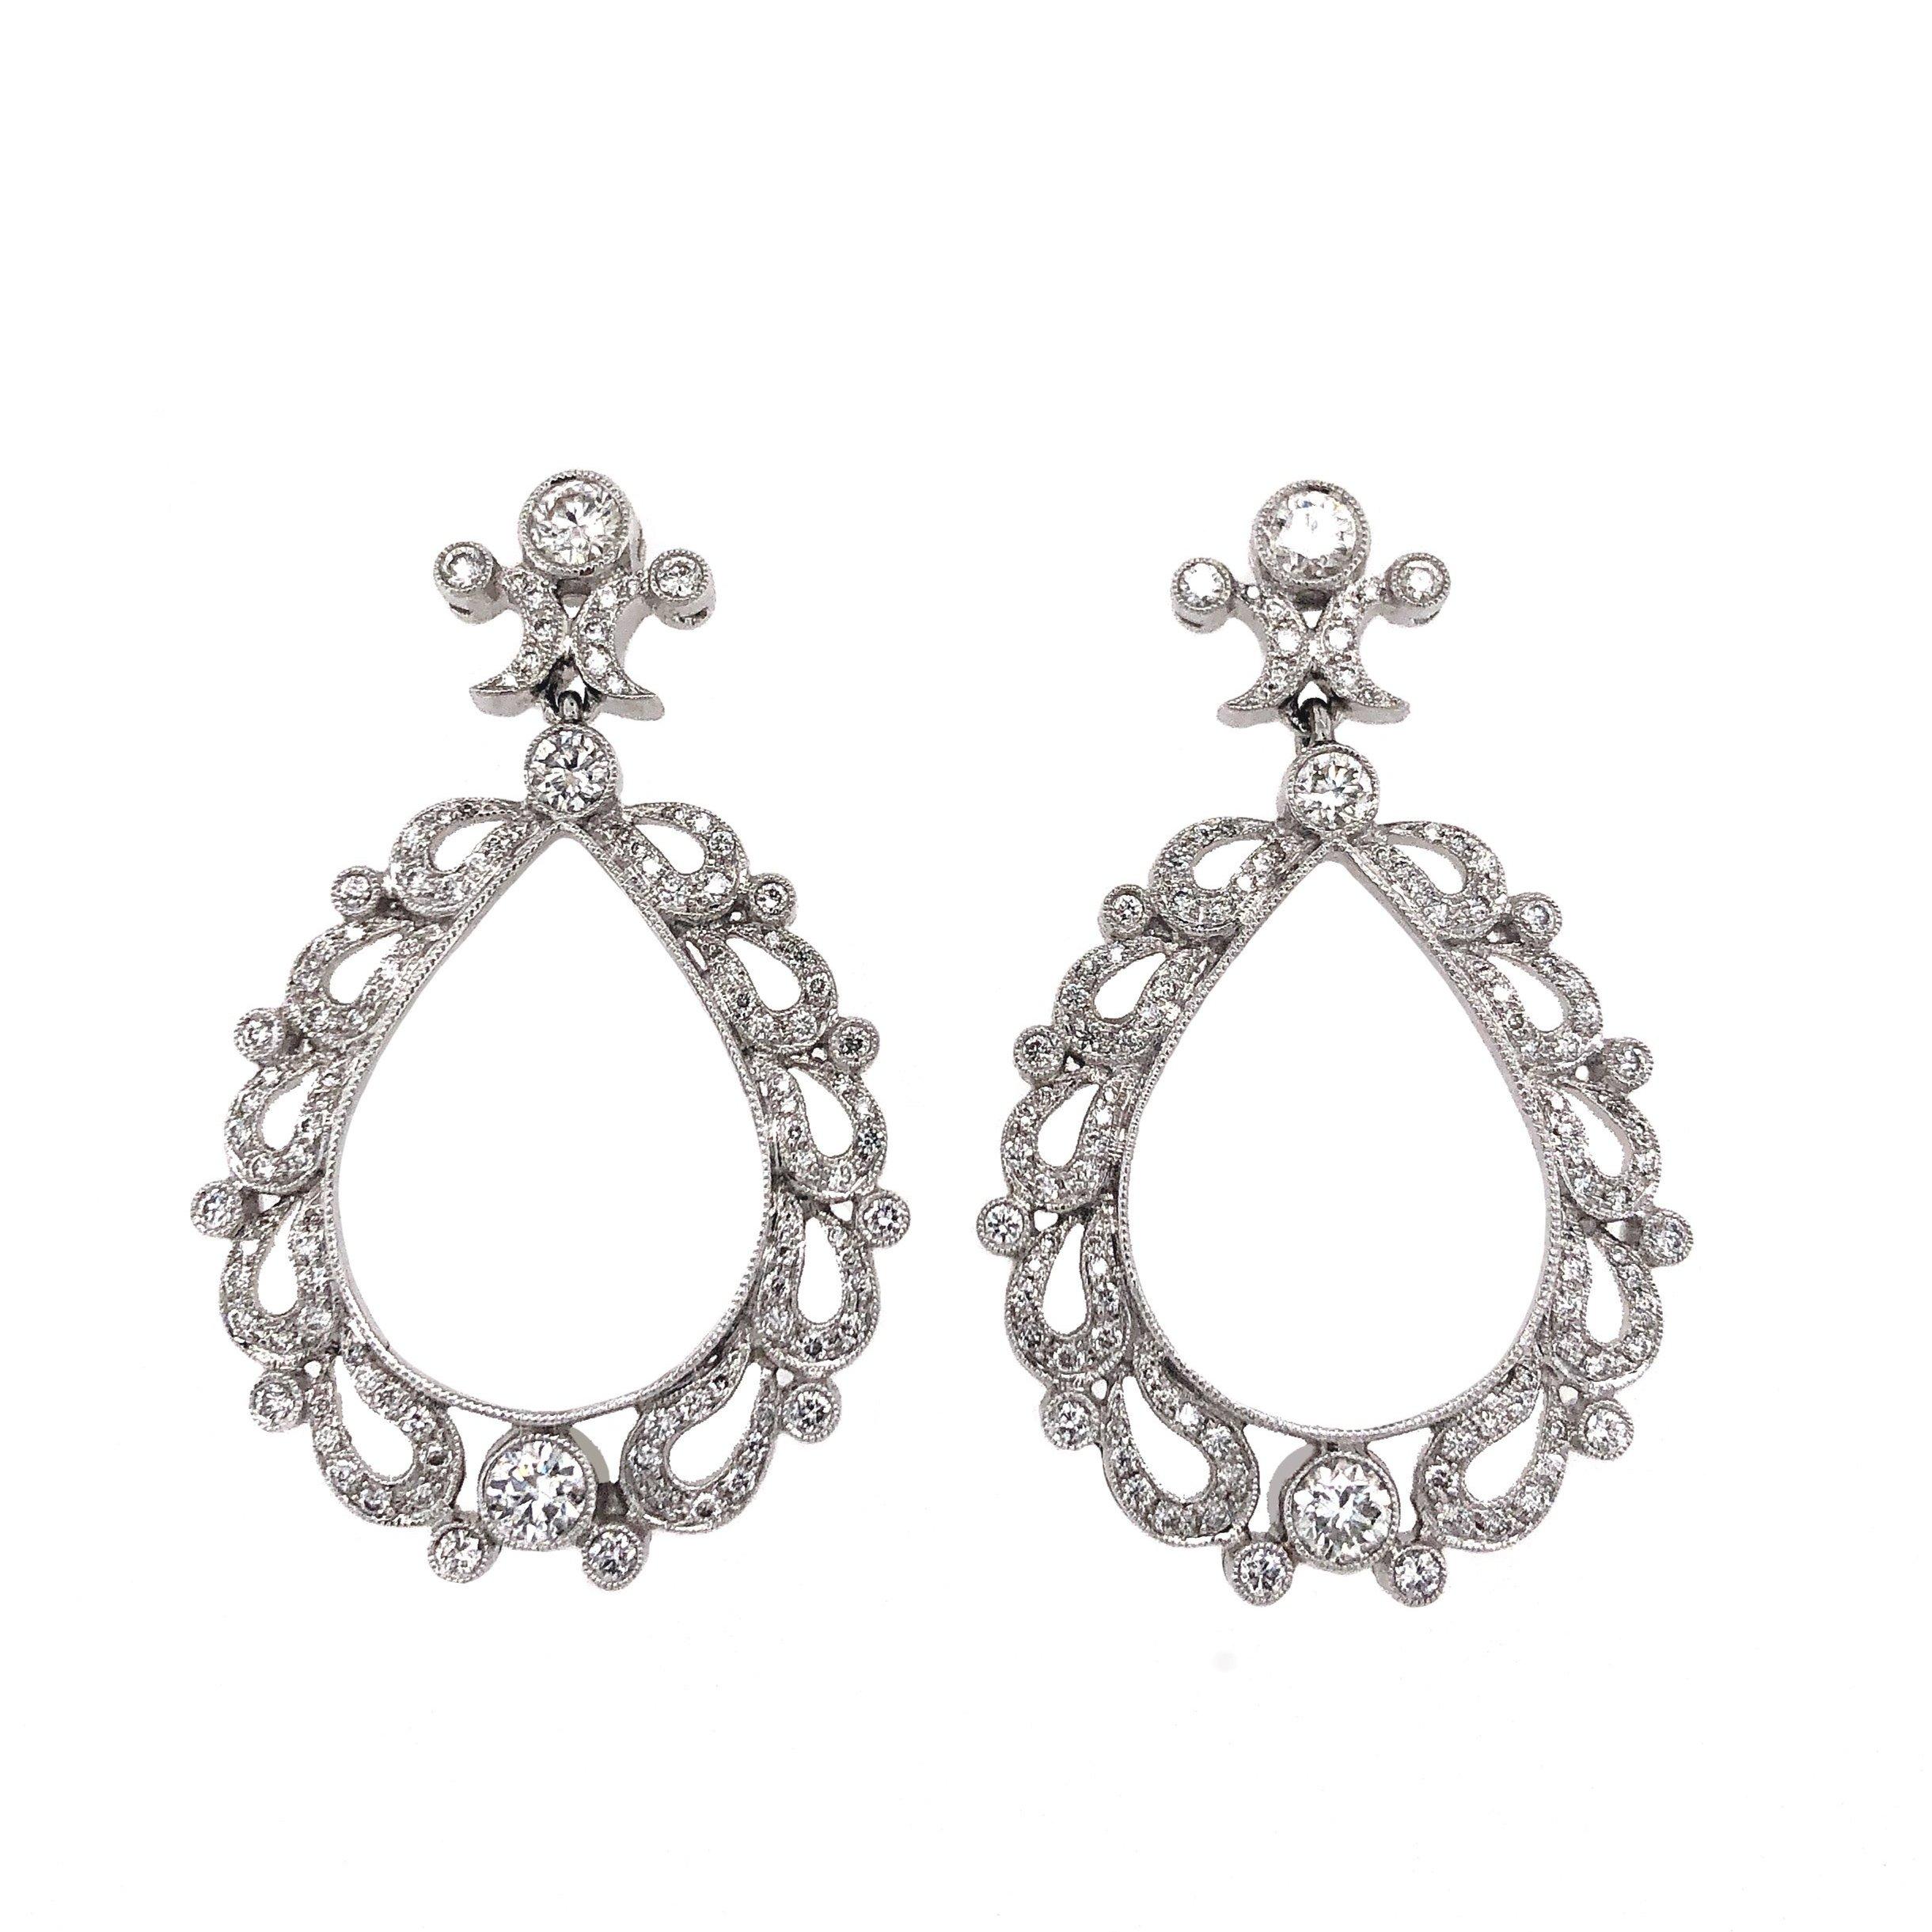 Crafted from 18K White Gold, these Pear pear-shaped chandelier Drop Earrings flaunt Pavée Diamonds and Round Brilliant Diamonds totaling 1.99 carats. The diamonds are deemed F in Color and VS in Clarity with excellent make and polish. The ornate